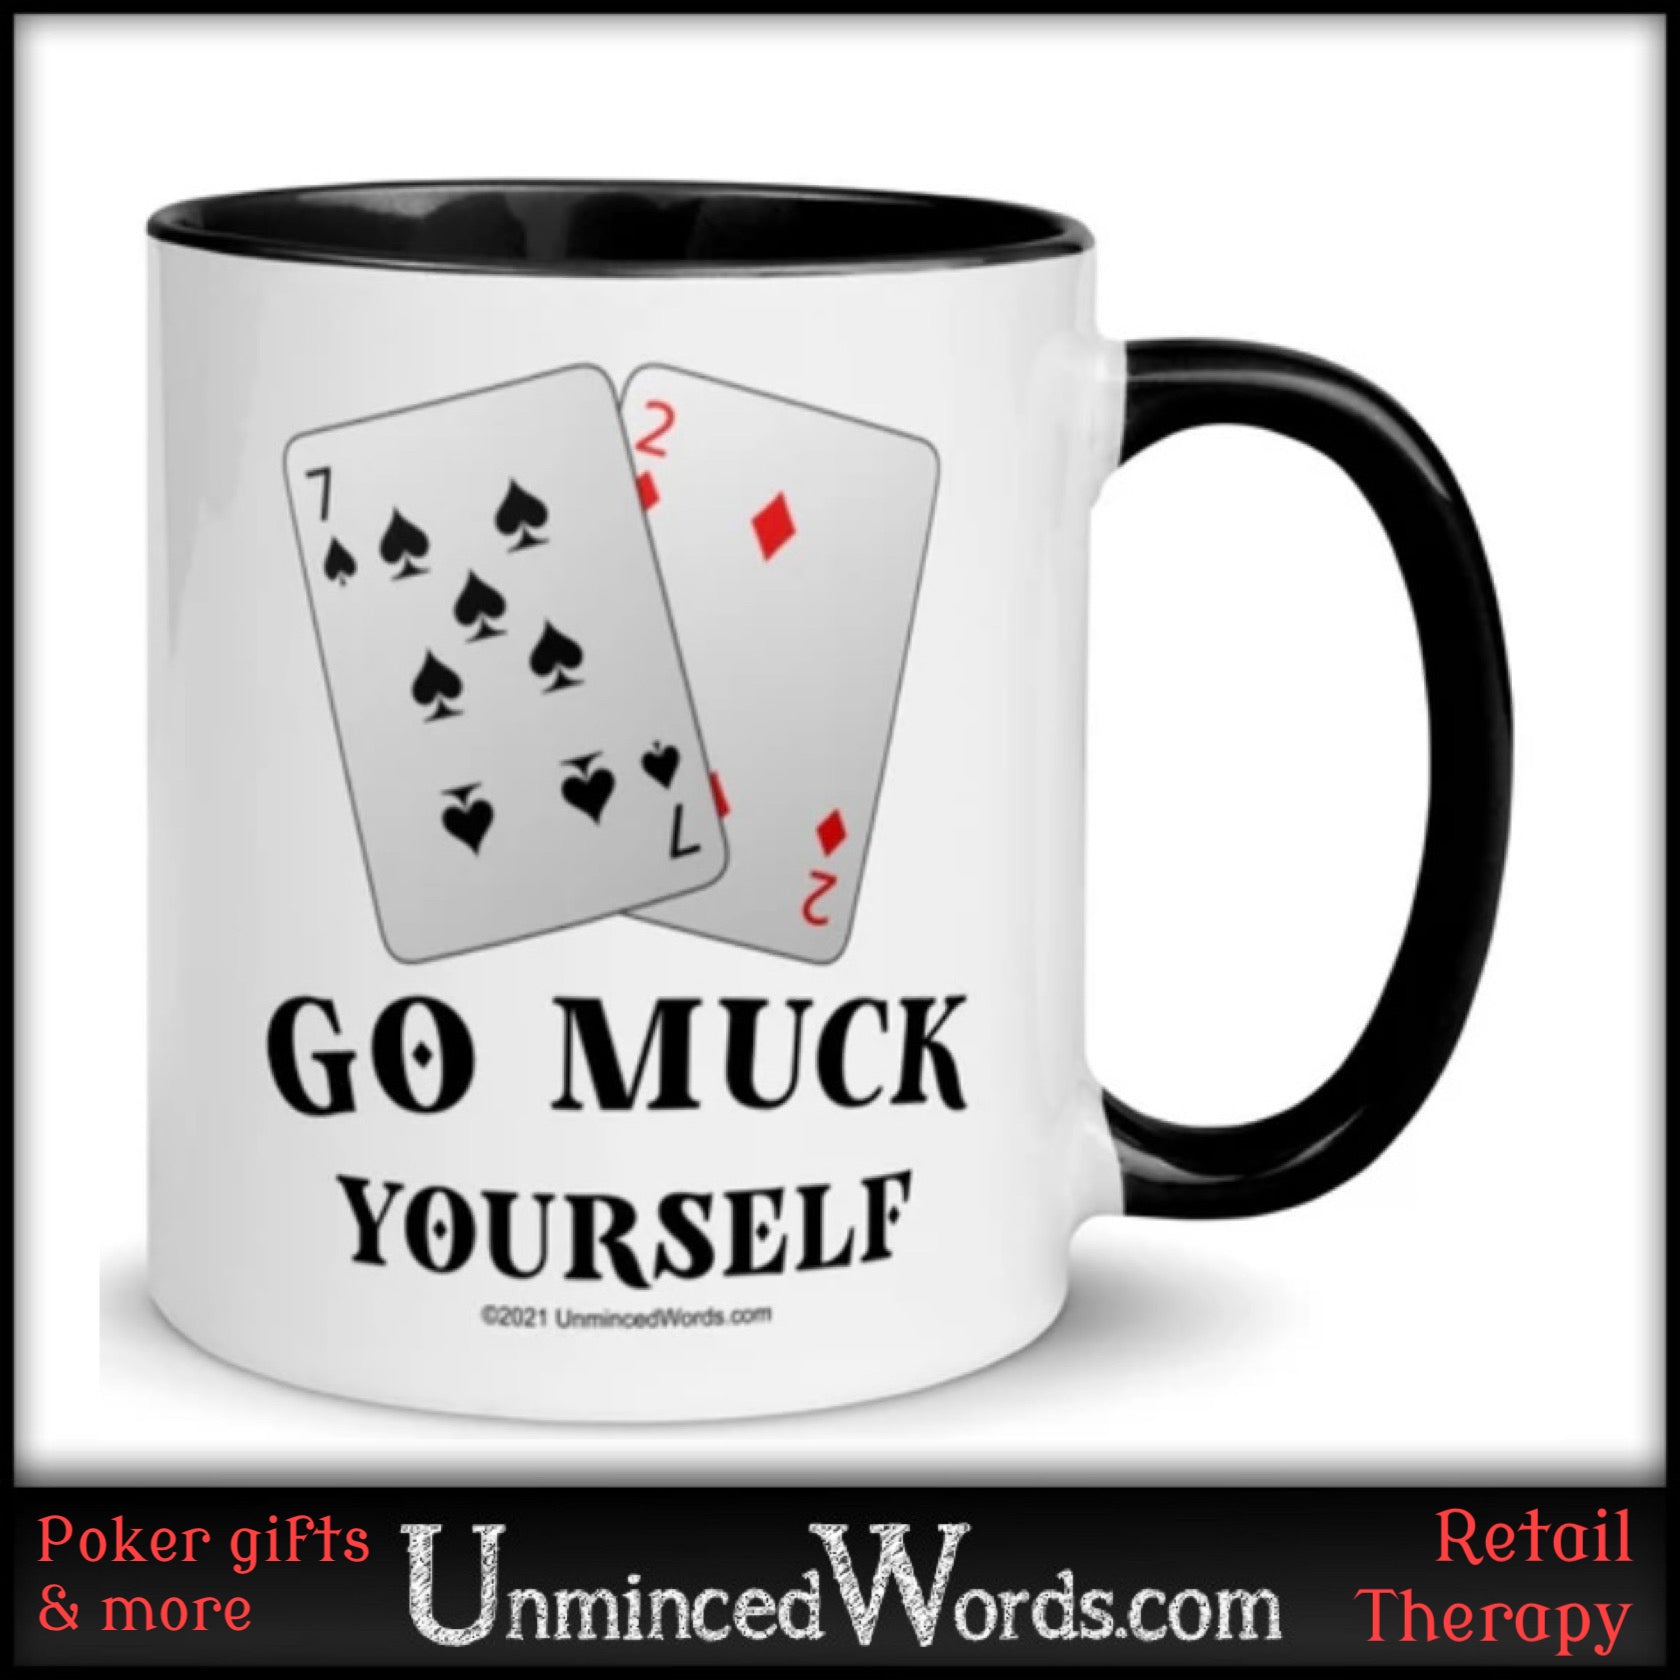 Express yourself to poker player friends